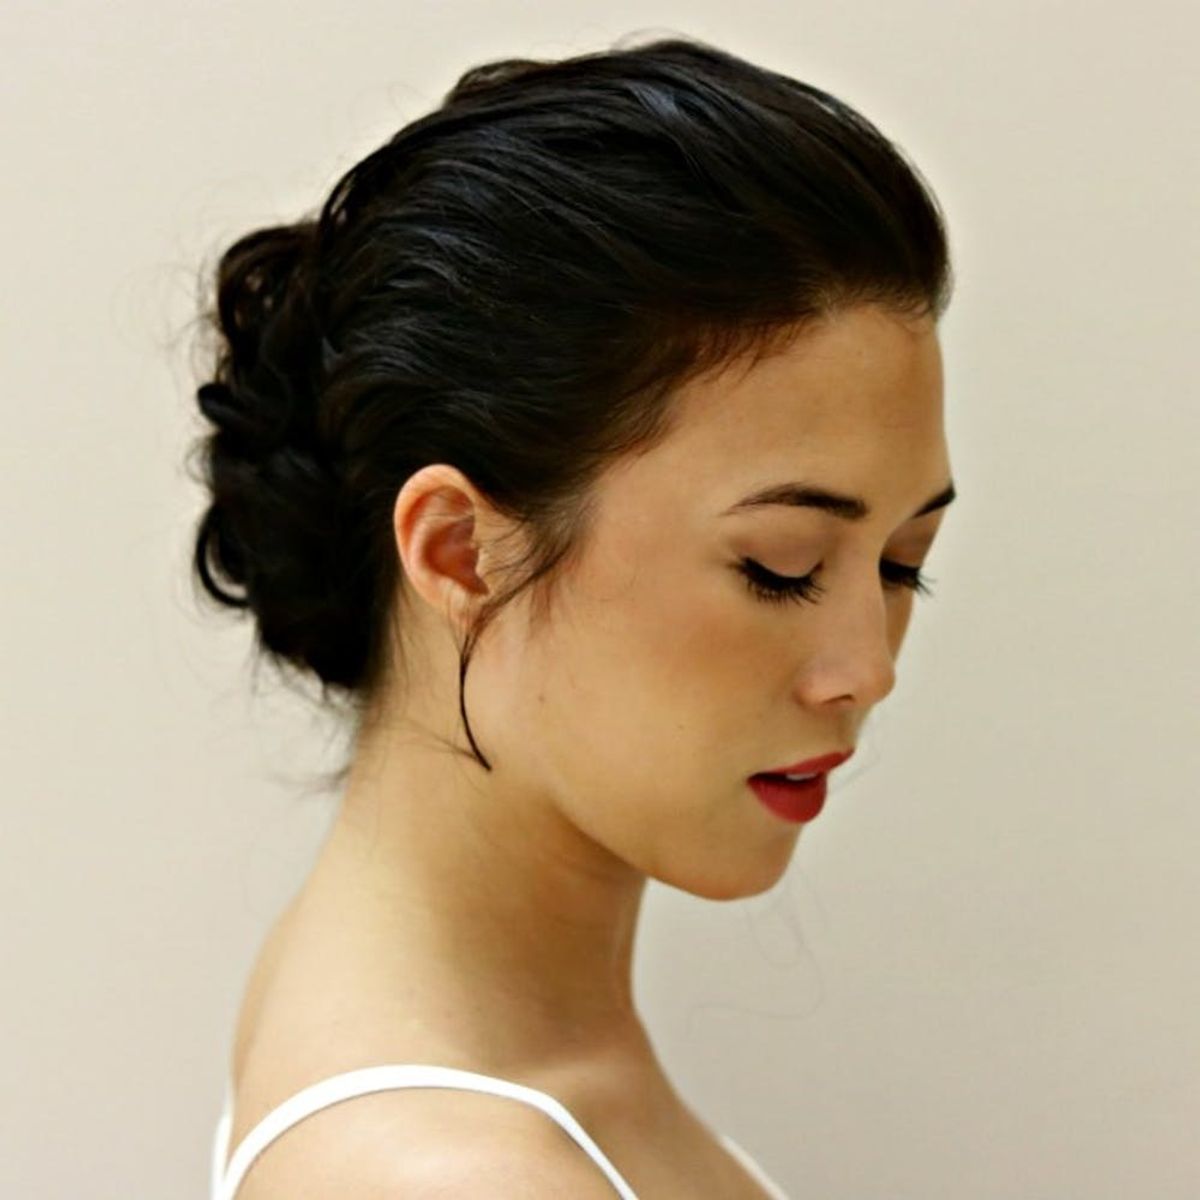 How to Create a Textured Updo (in 6 EASY Steps!)